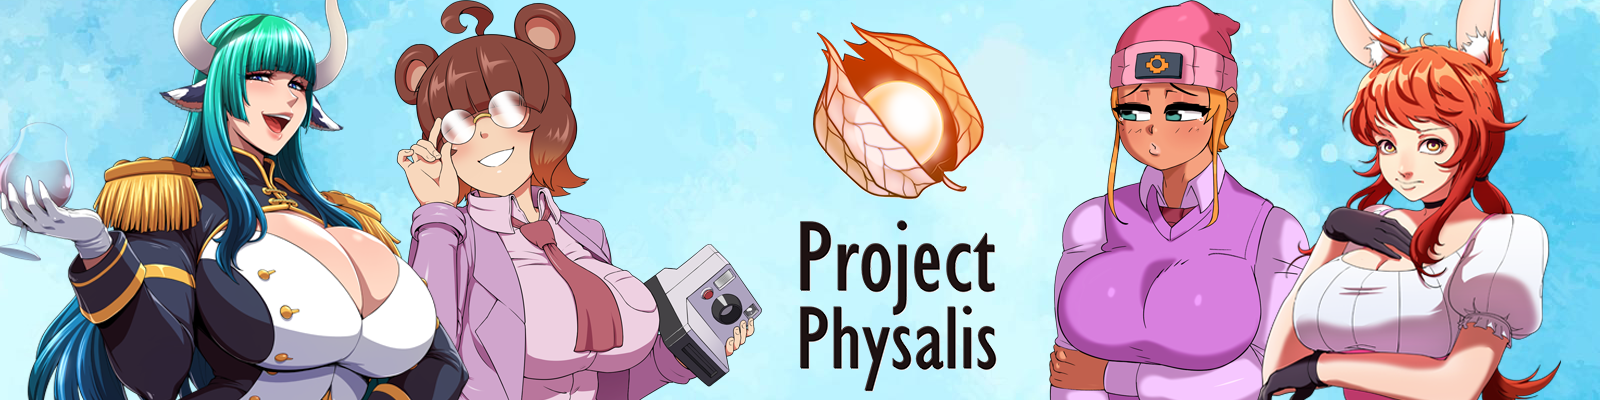 Project Physalis Game Collection poster